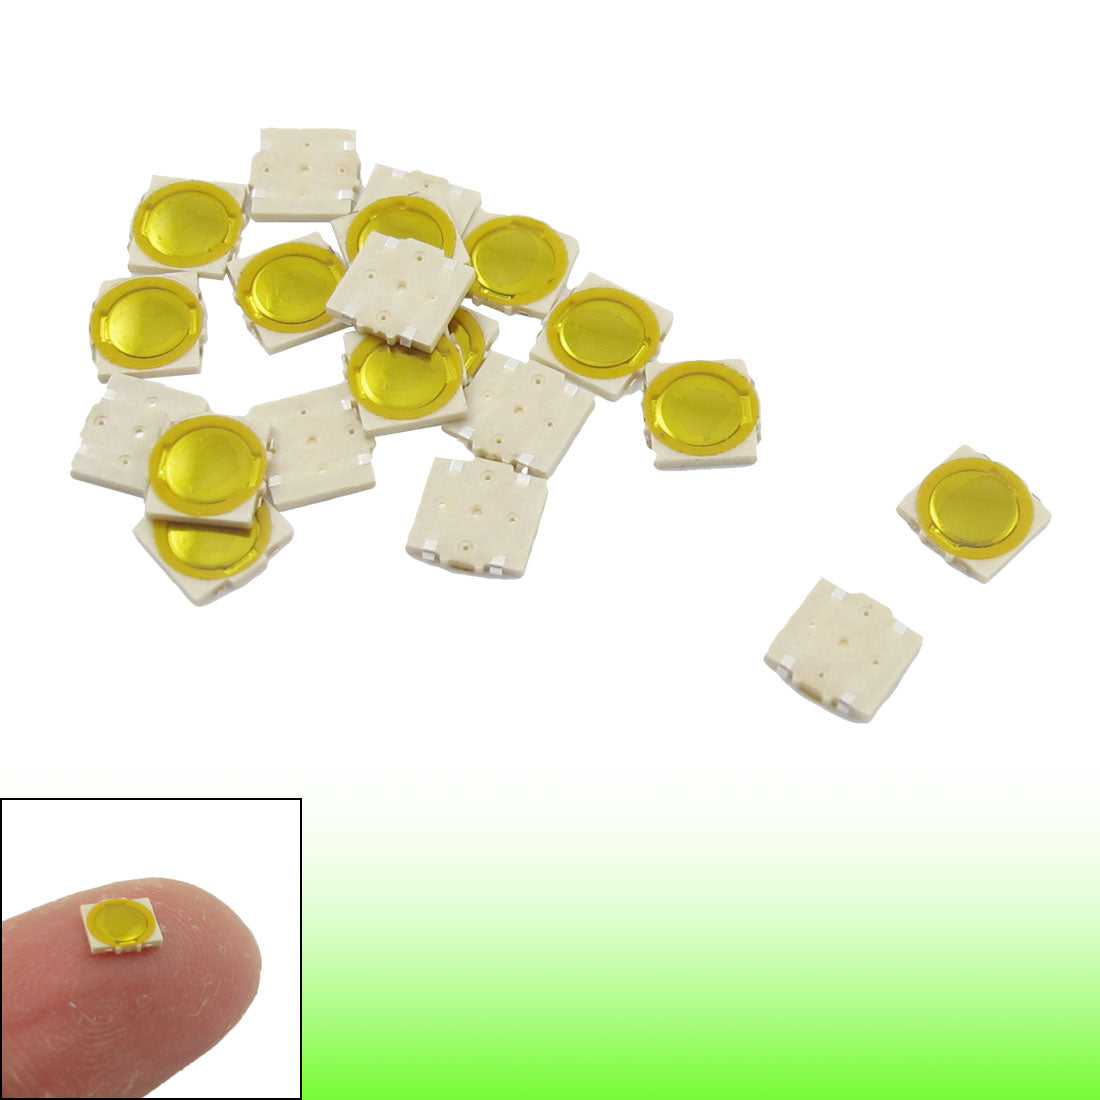 uxcell Uxcell 20 Pcs Momentary Tact Switch SMT Surface Mounted Devices Ultrathin Tactile Switches 5x5mm